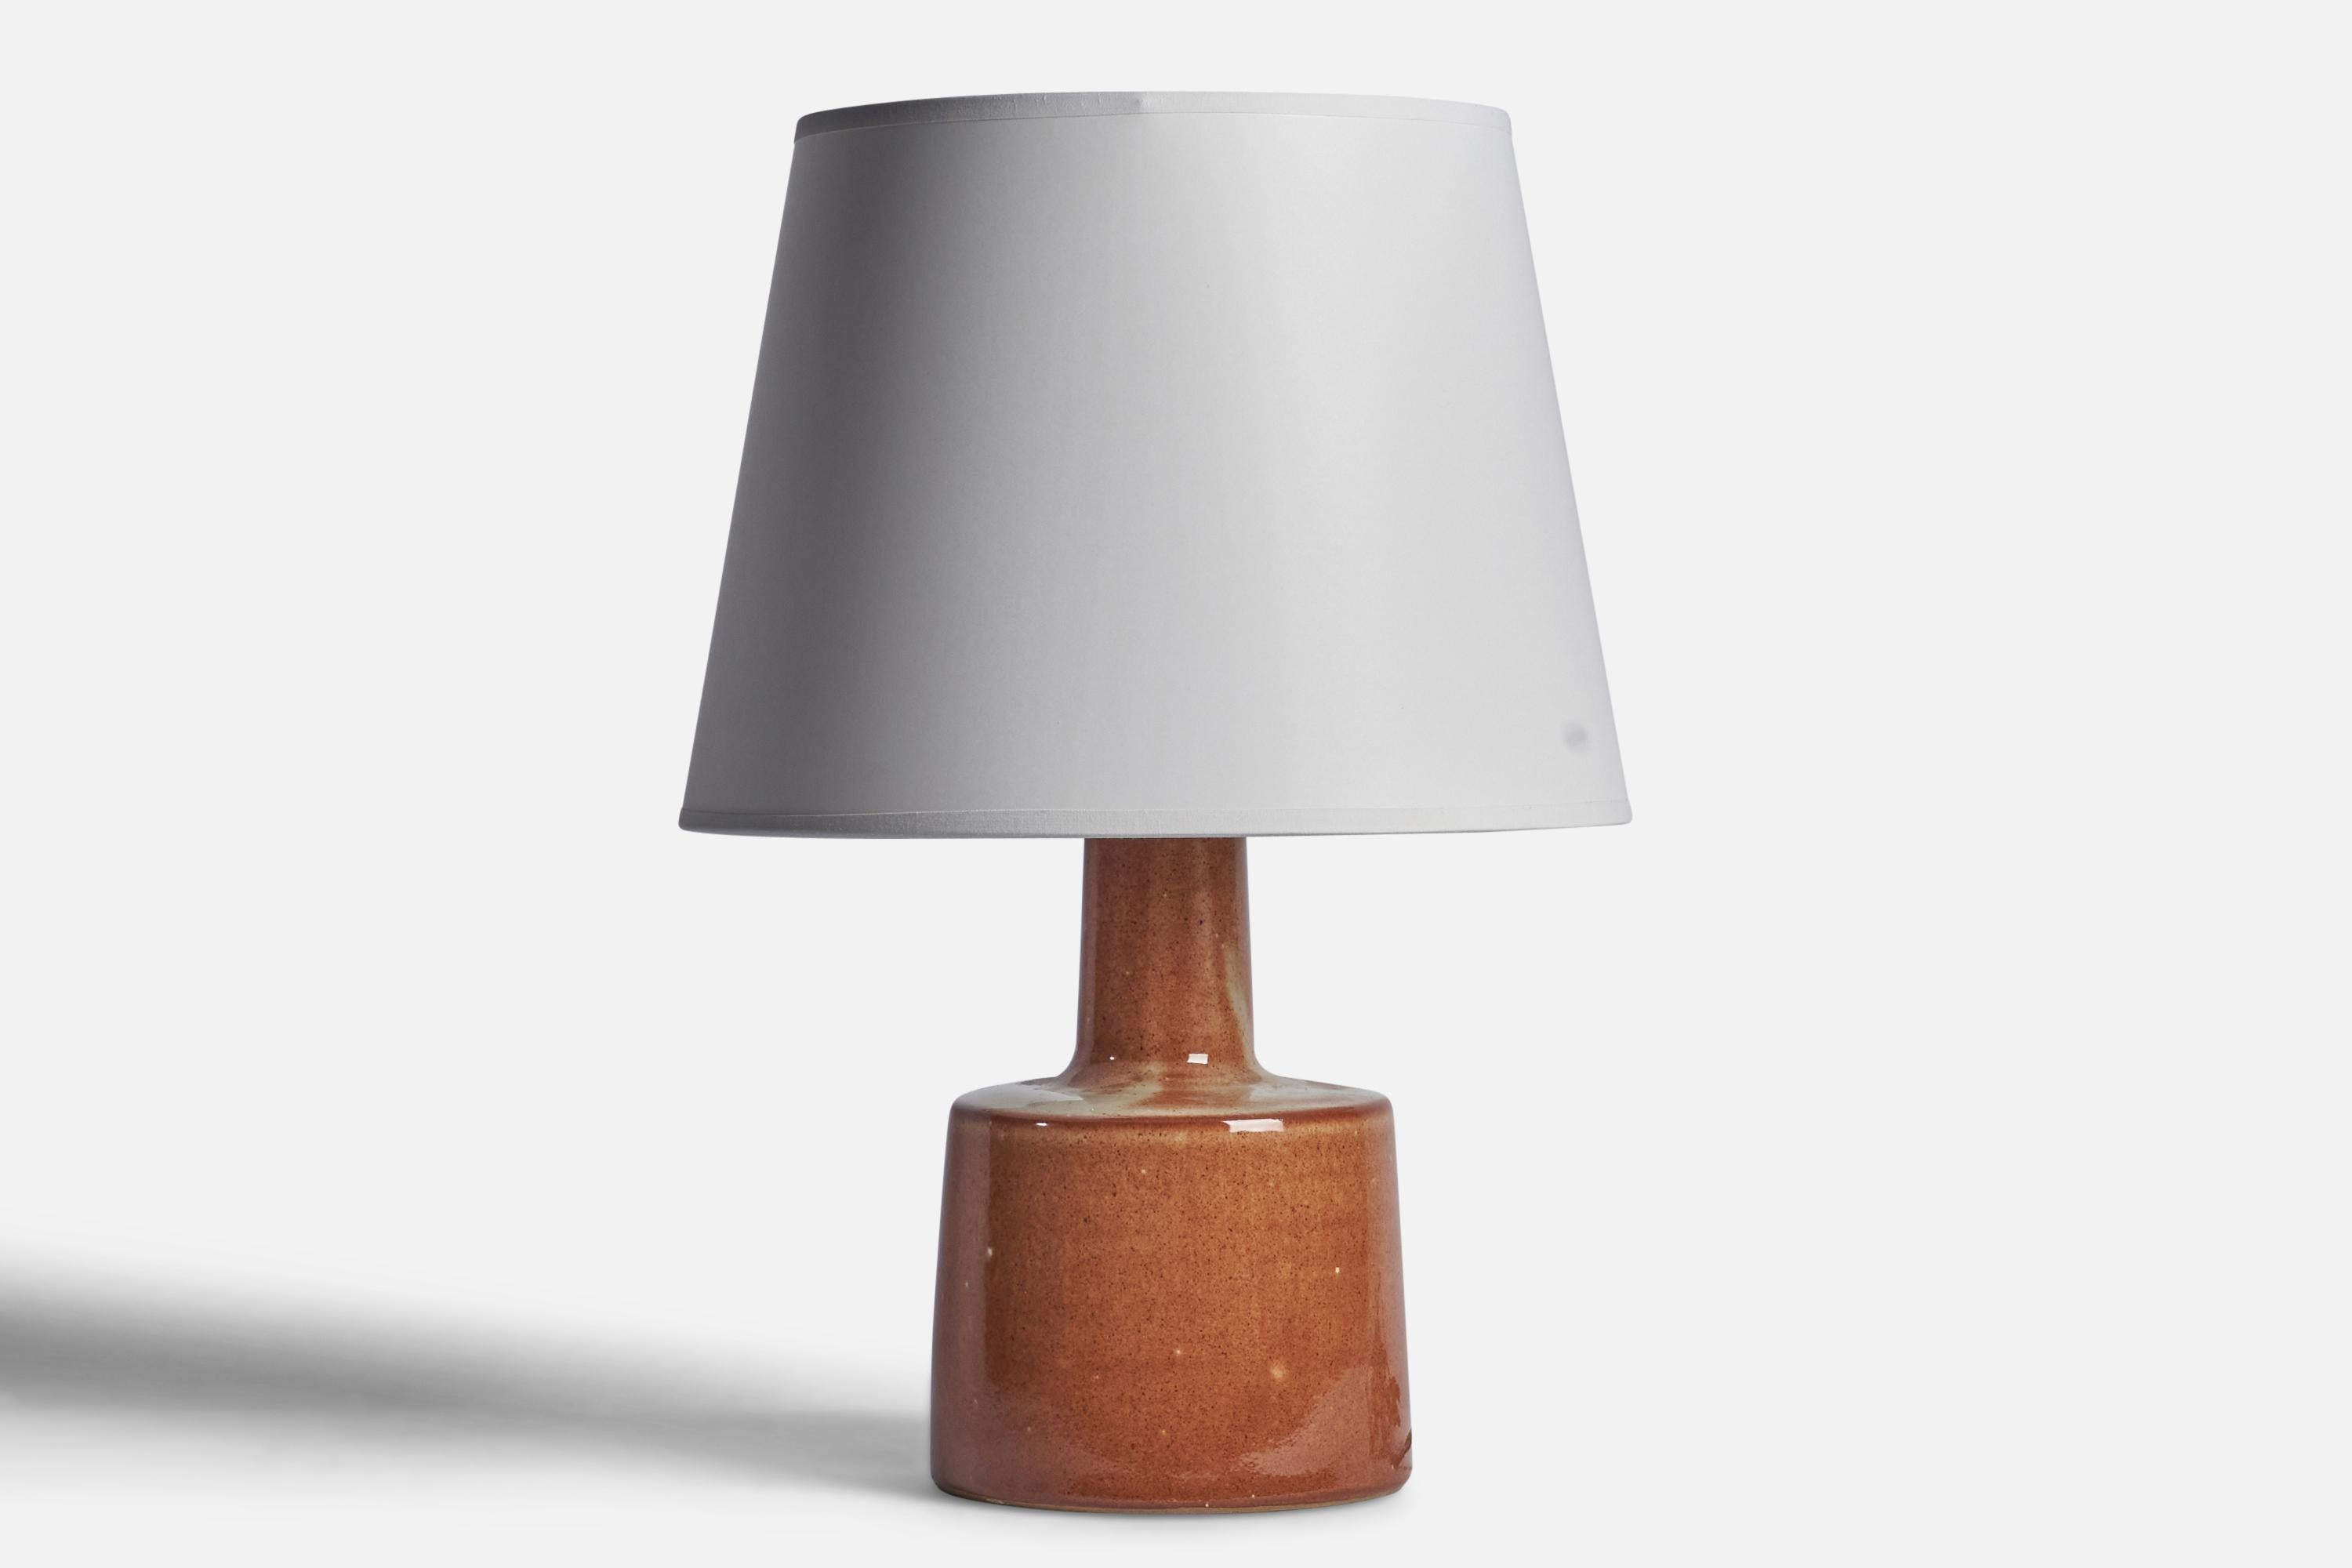 A brown-glazed ceramic table lamp designed by Jane & Gordon Martz and produced by Marshall Studios, USA, 1960s.

Dimensions of Lamp (inches): 12” H x 6” Diameter
Dimensions of Shade (inches): 8.75” Top Diameter x 12” Bottom Diameter x 9” H